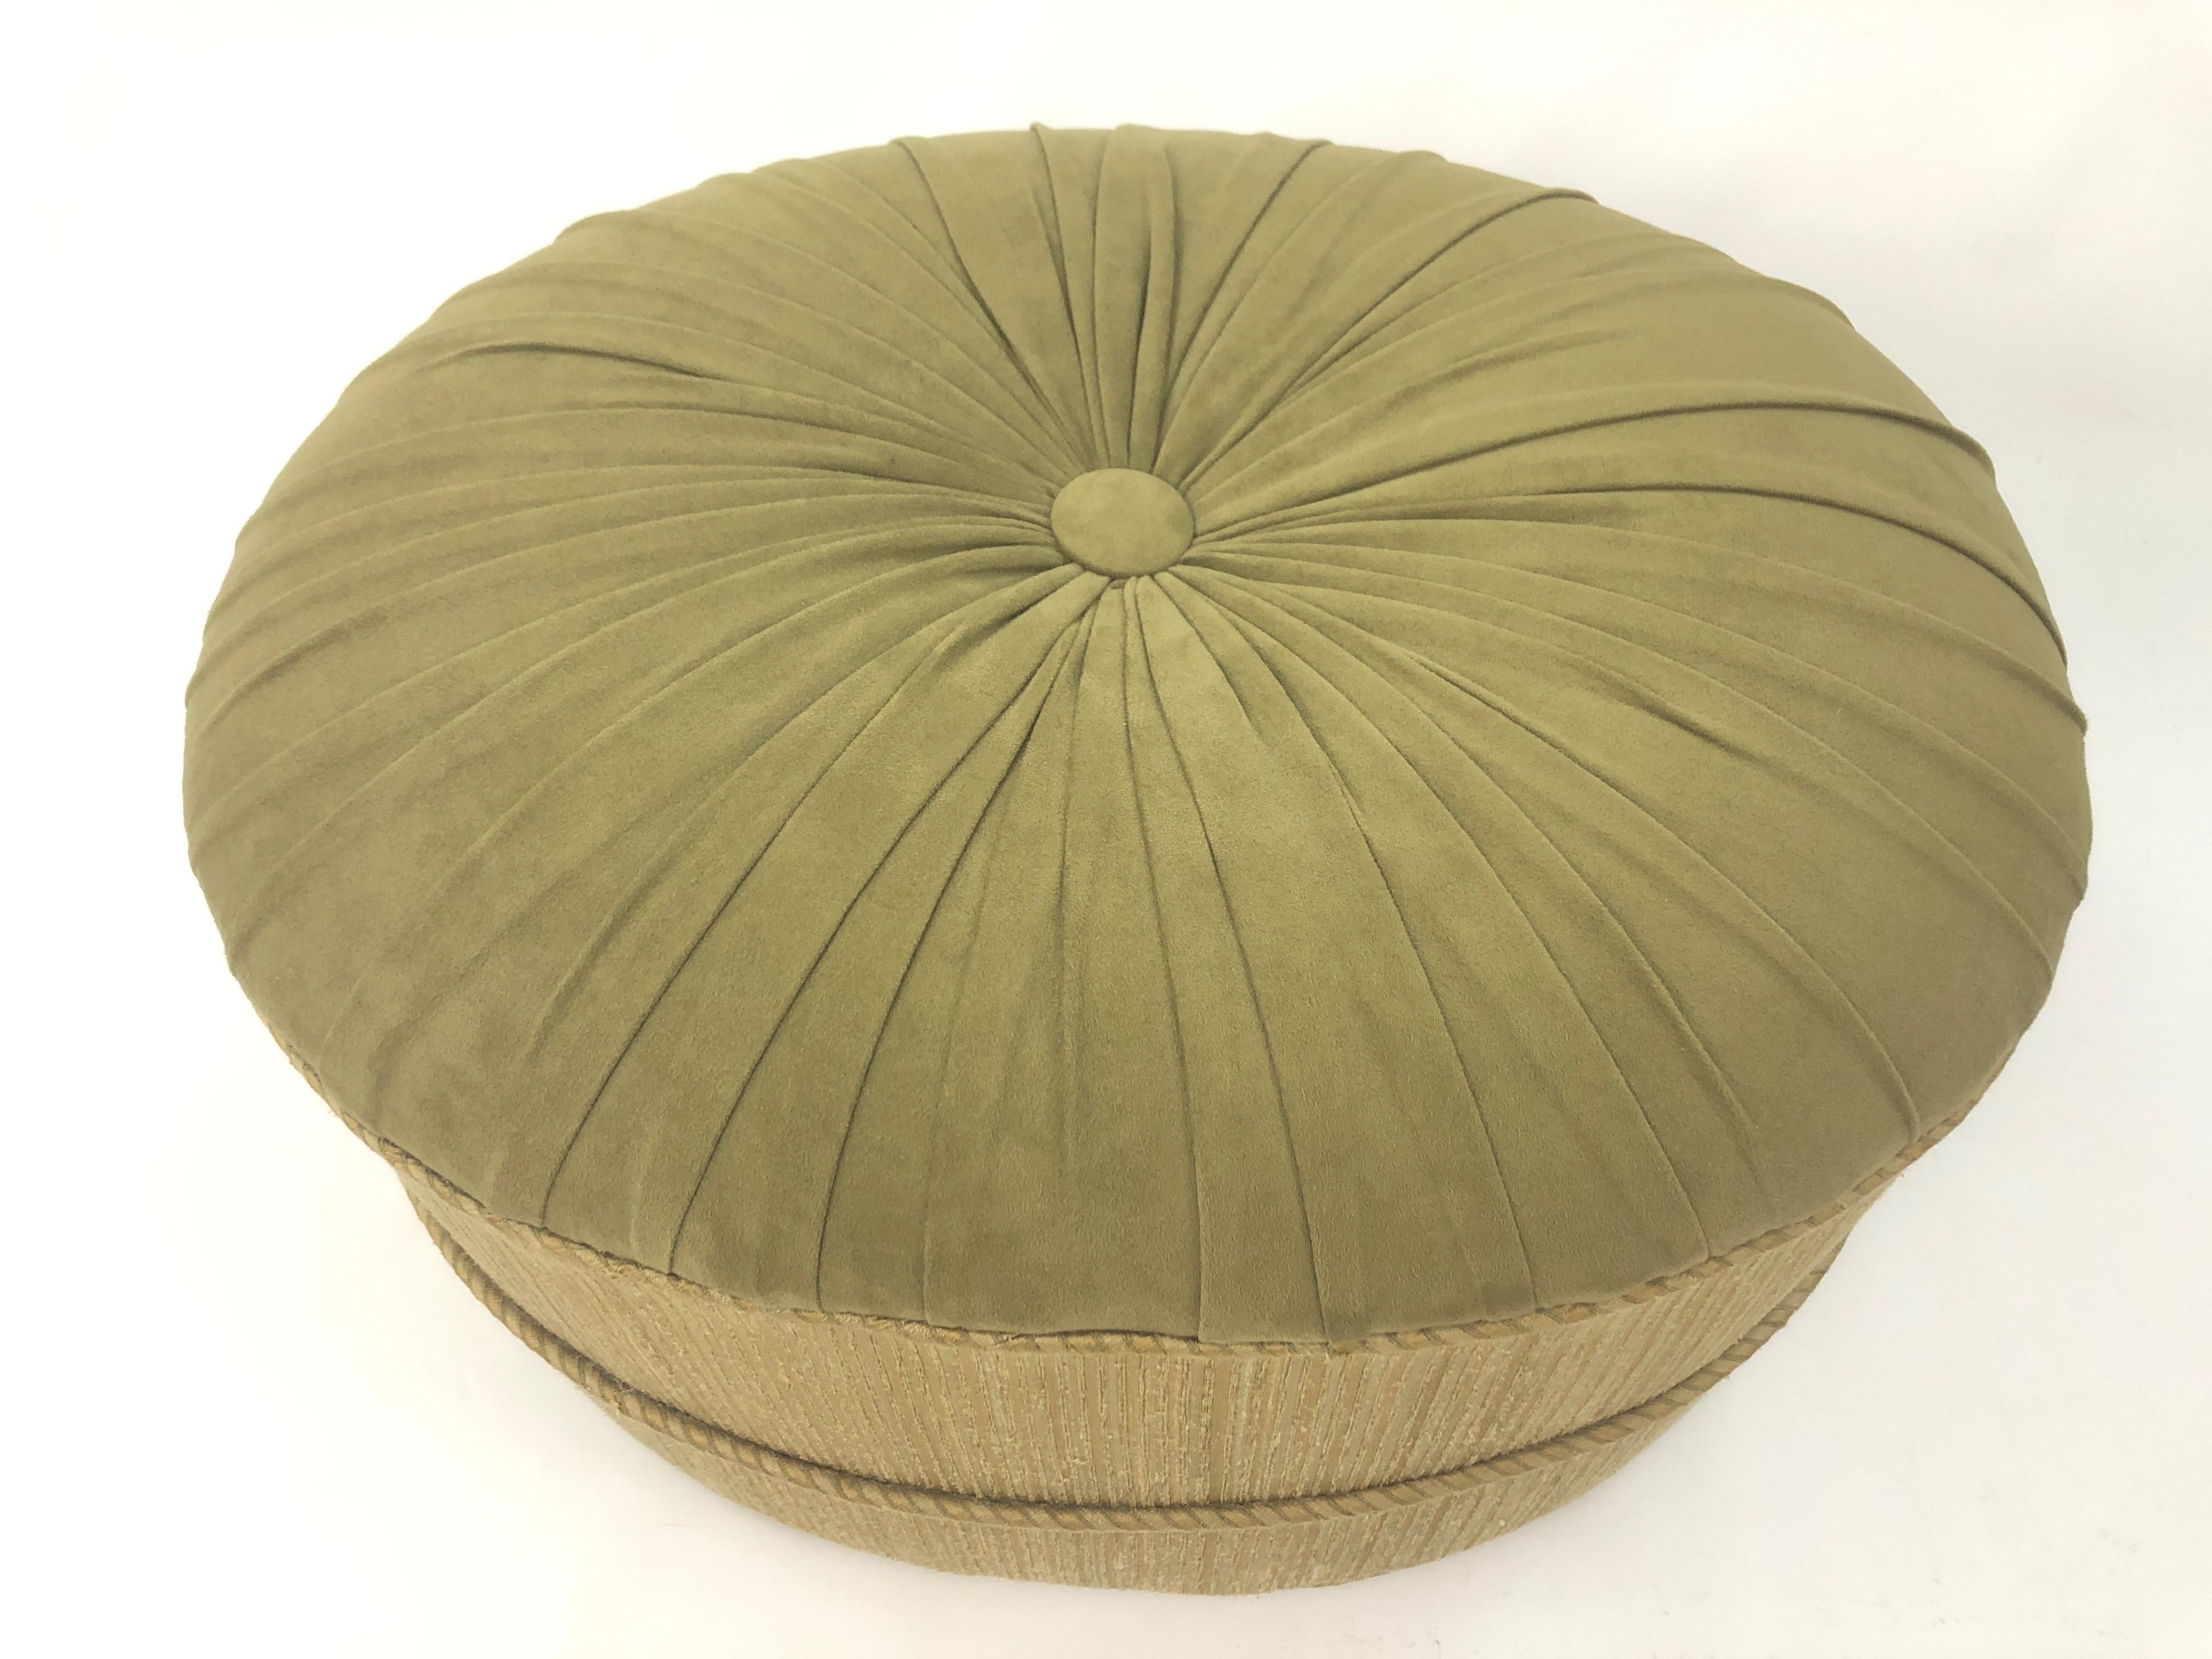 American Schnazzy Oval Ultrasuede Ottoman Pouf